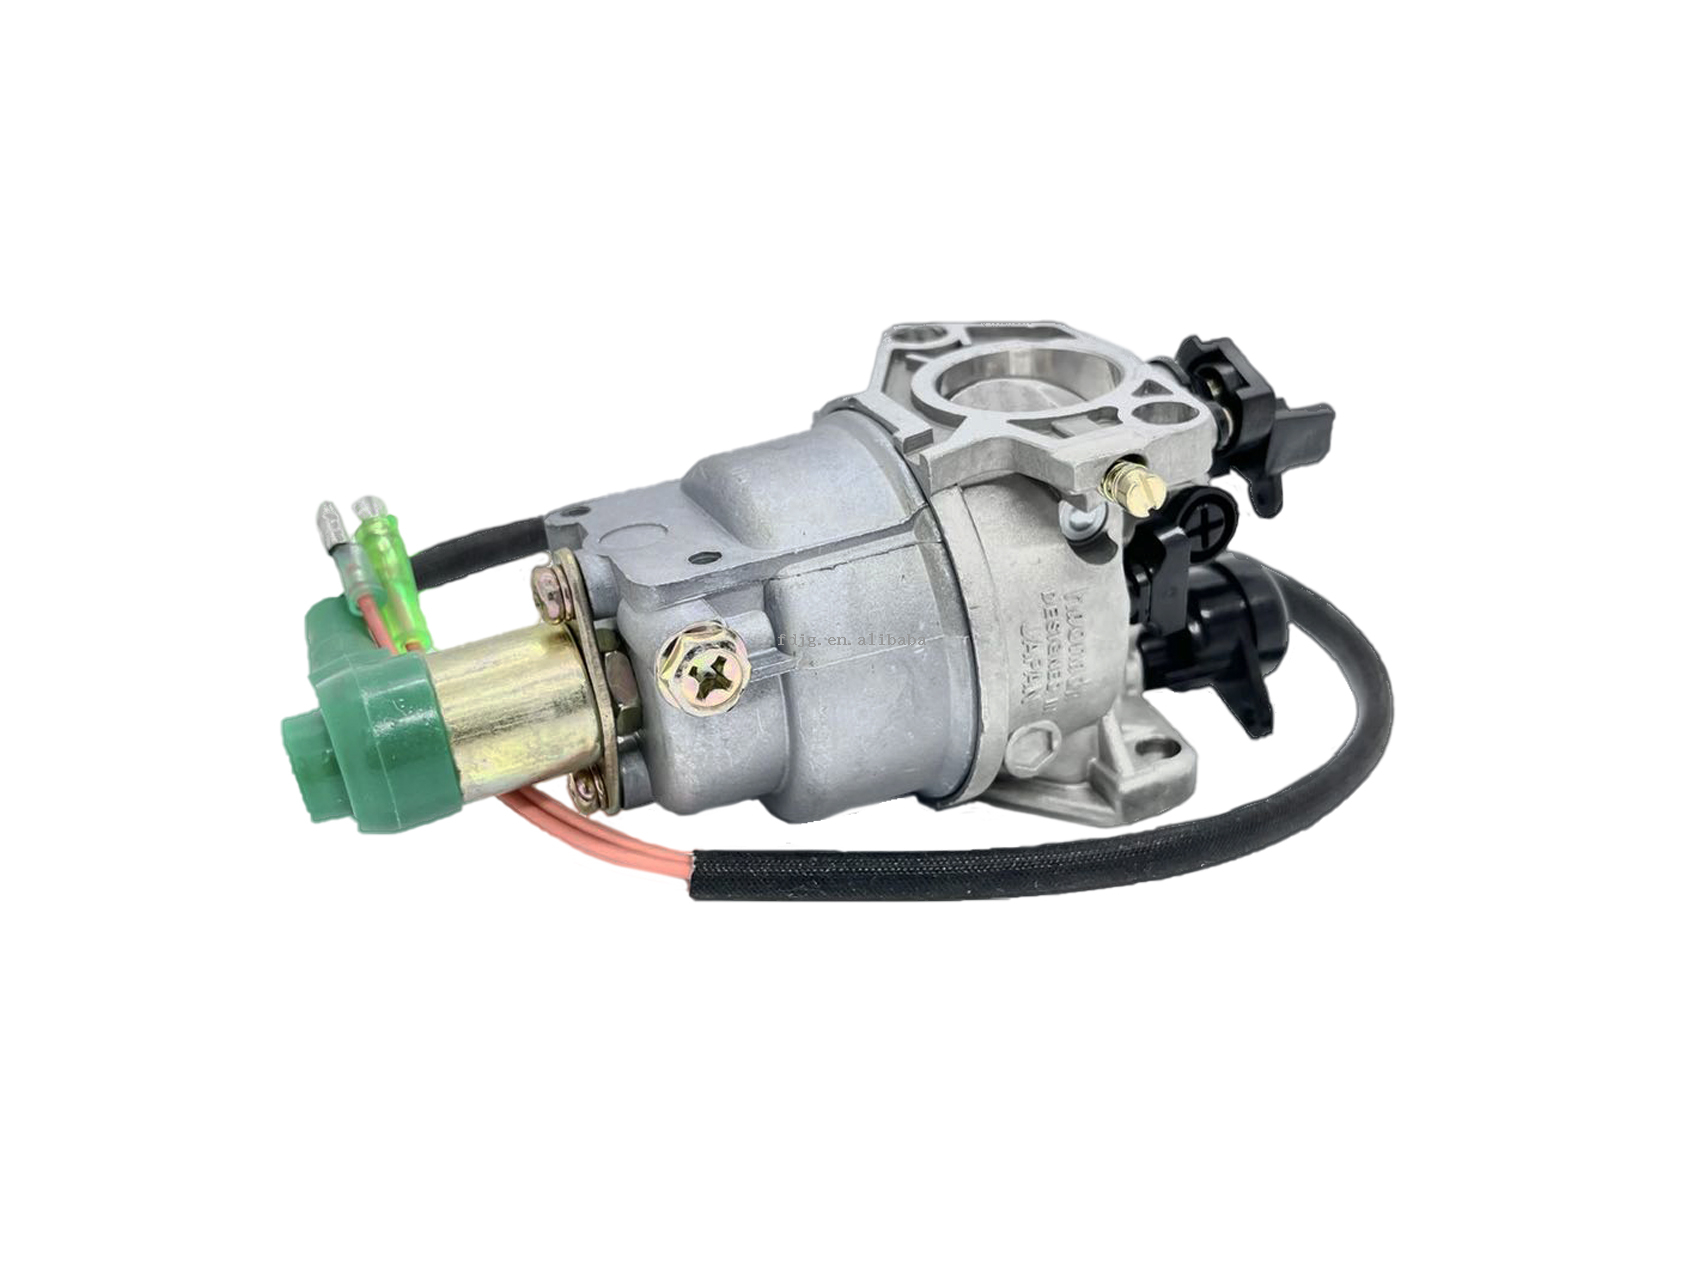 GX390 Carb with Solenoid Stable Automatic Petrol Generator Carburetor